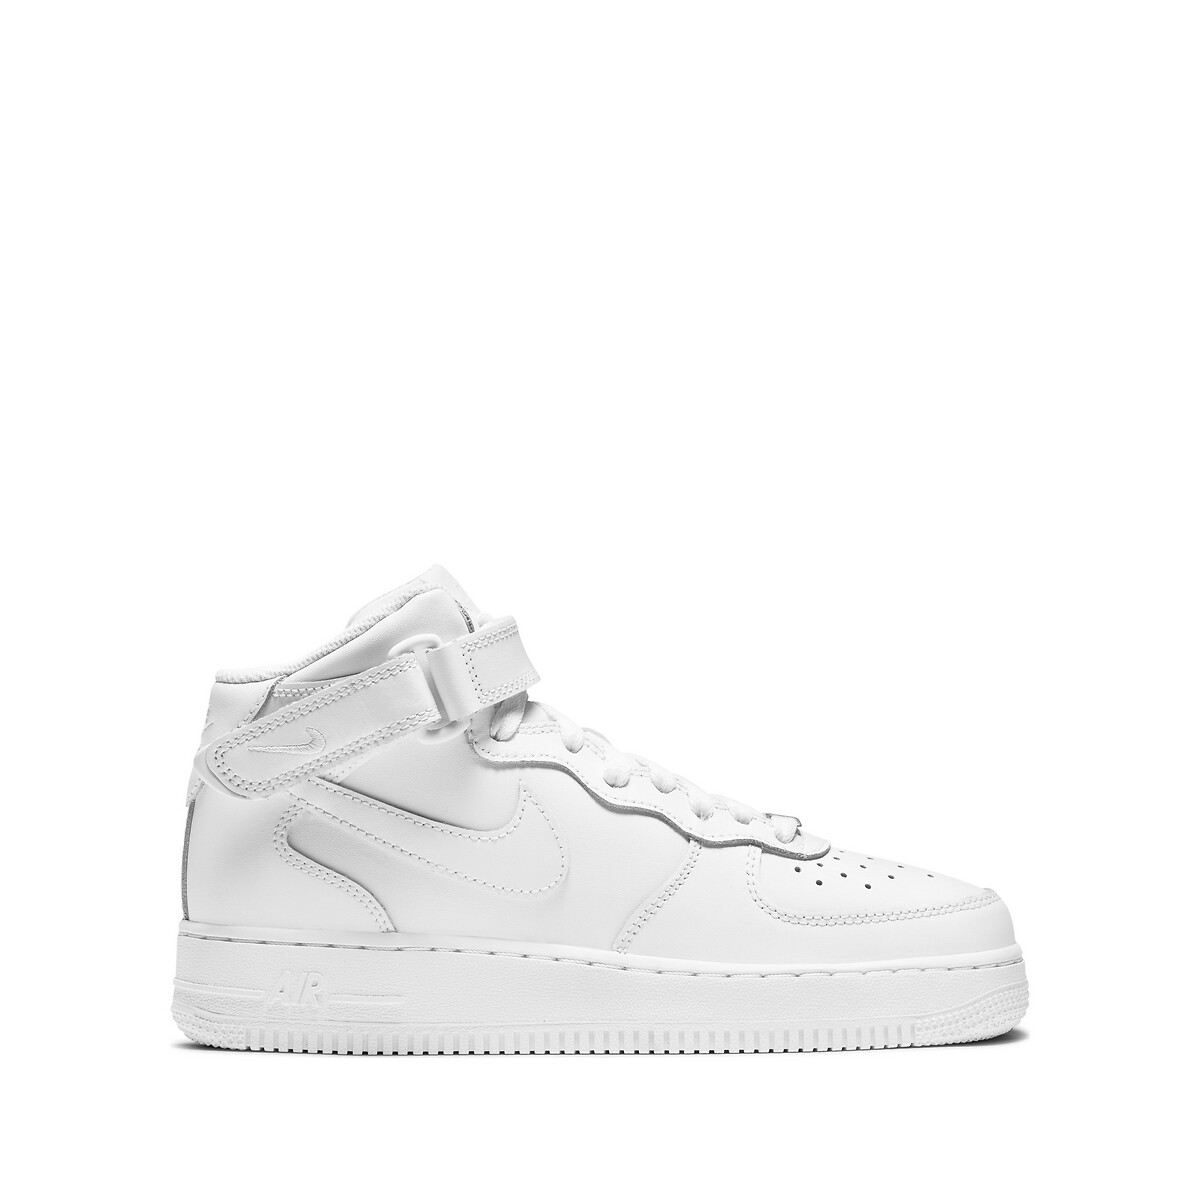 Air force one blanche | La Redoute